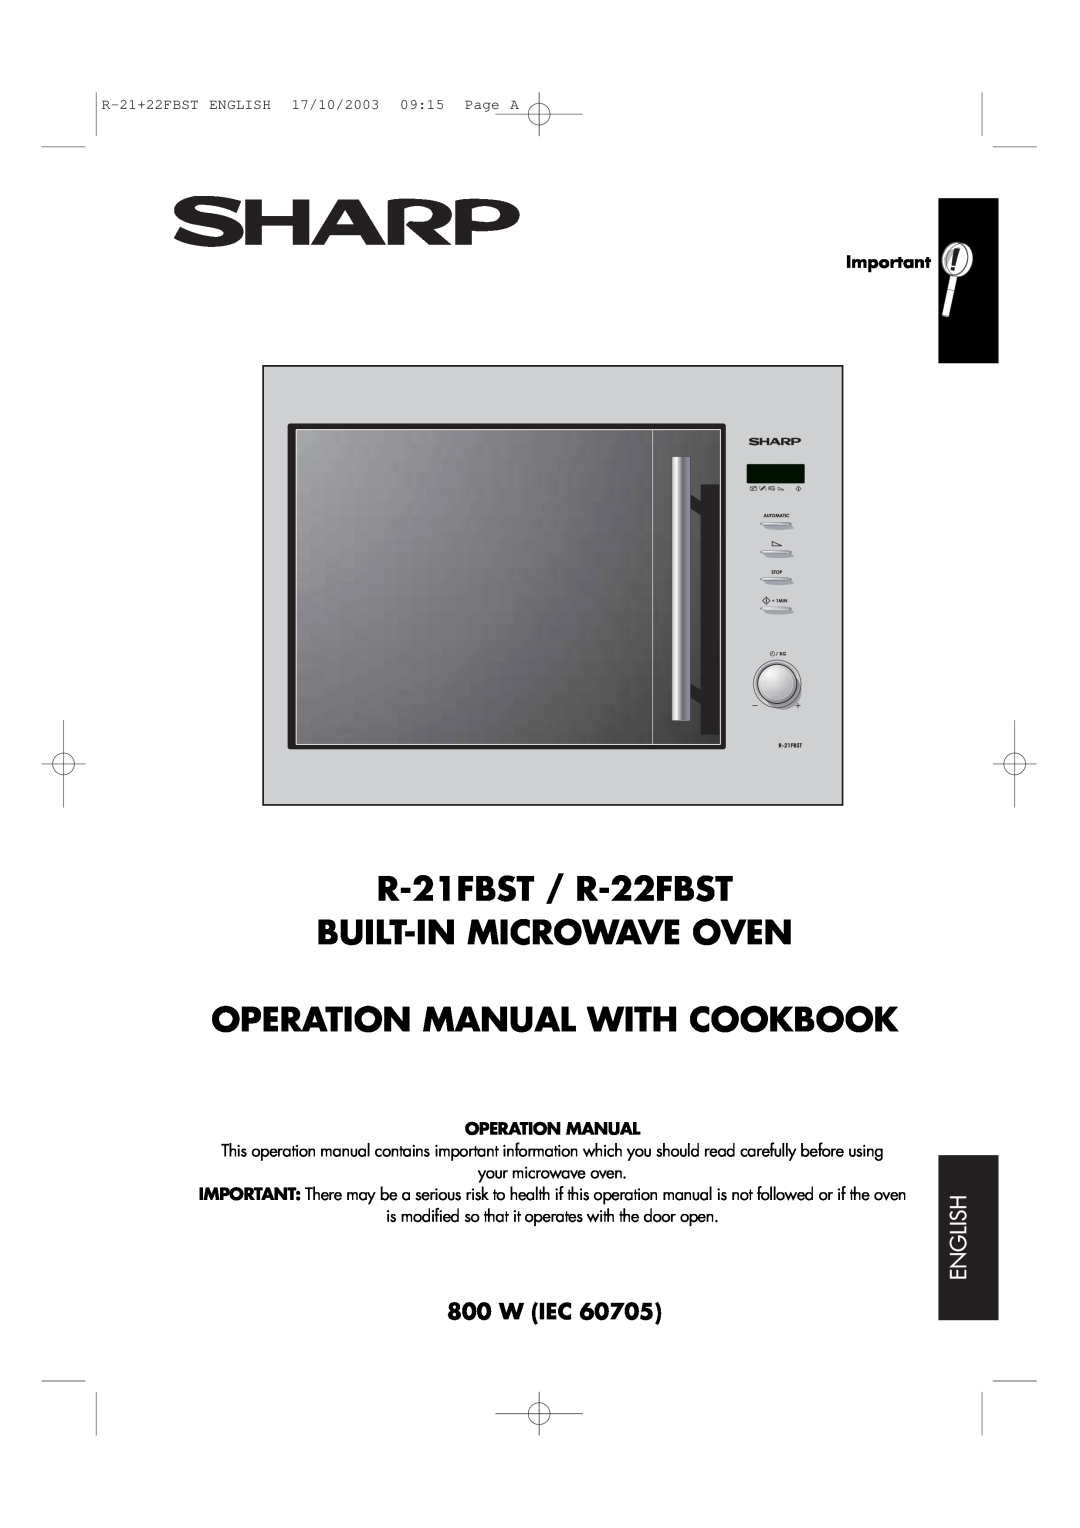 Sharp R-21 FBST operation manual W Iec, English, R-21FBST / R-22FBST, Built-Inmicrowave Oven 